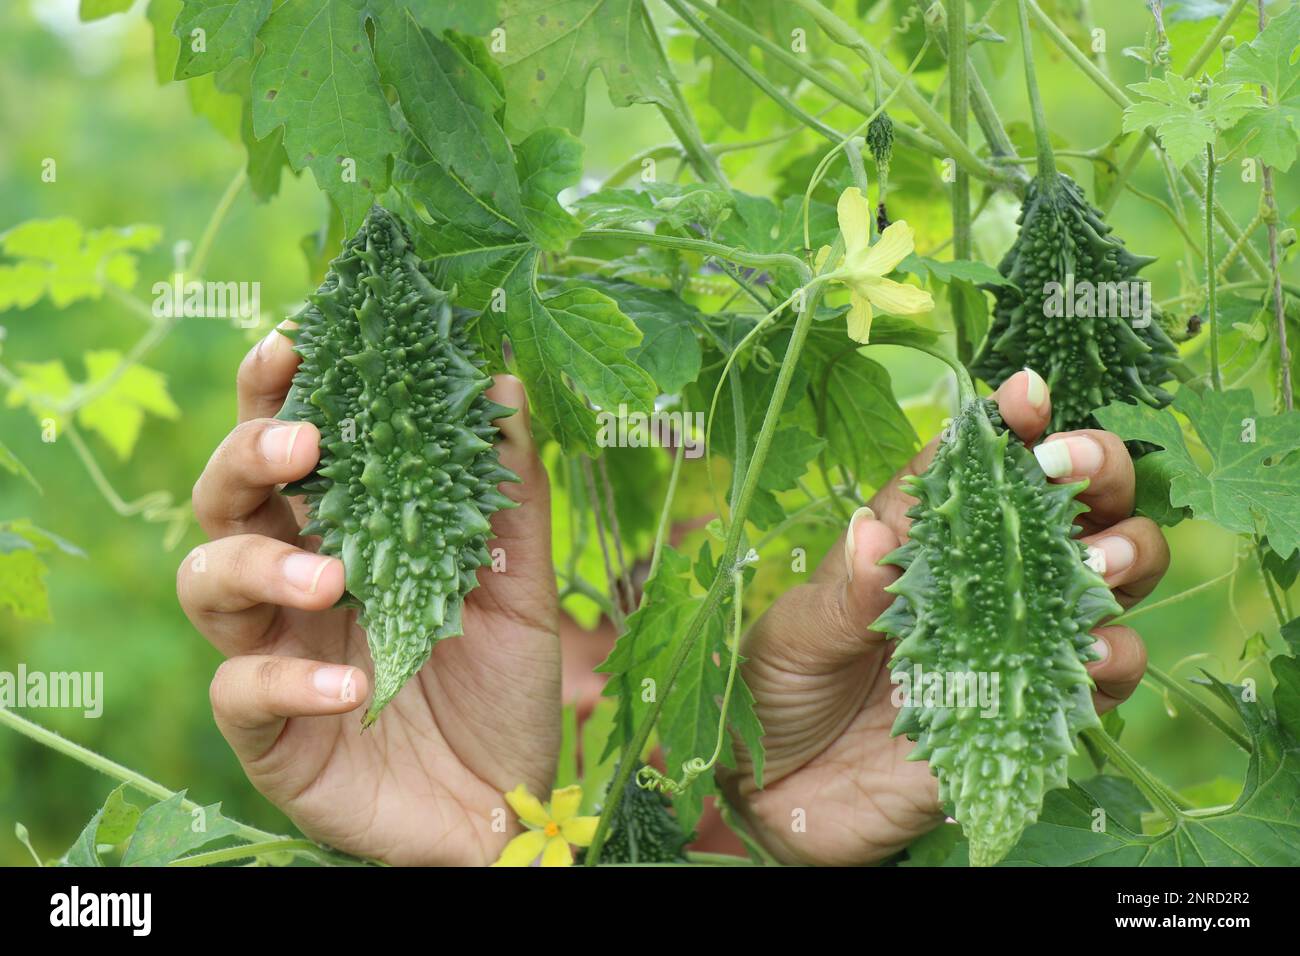 Fresh bitter melon or bitter gourd ready to harvest held in hand from plant. balsam pear is a vegetable with many medicinal properties Stock Photo